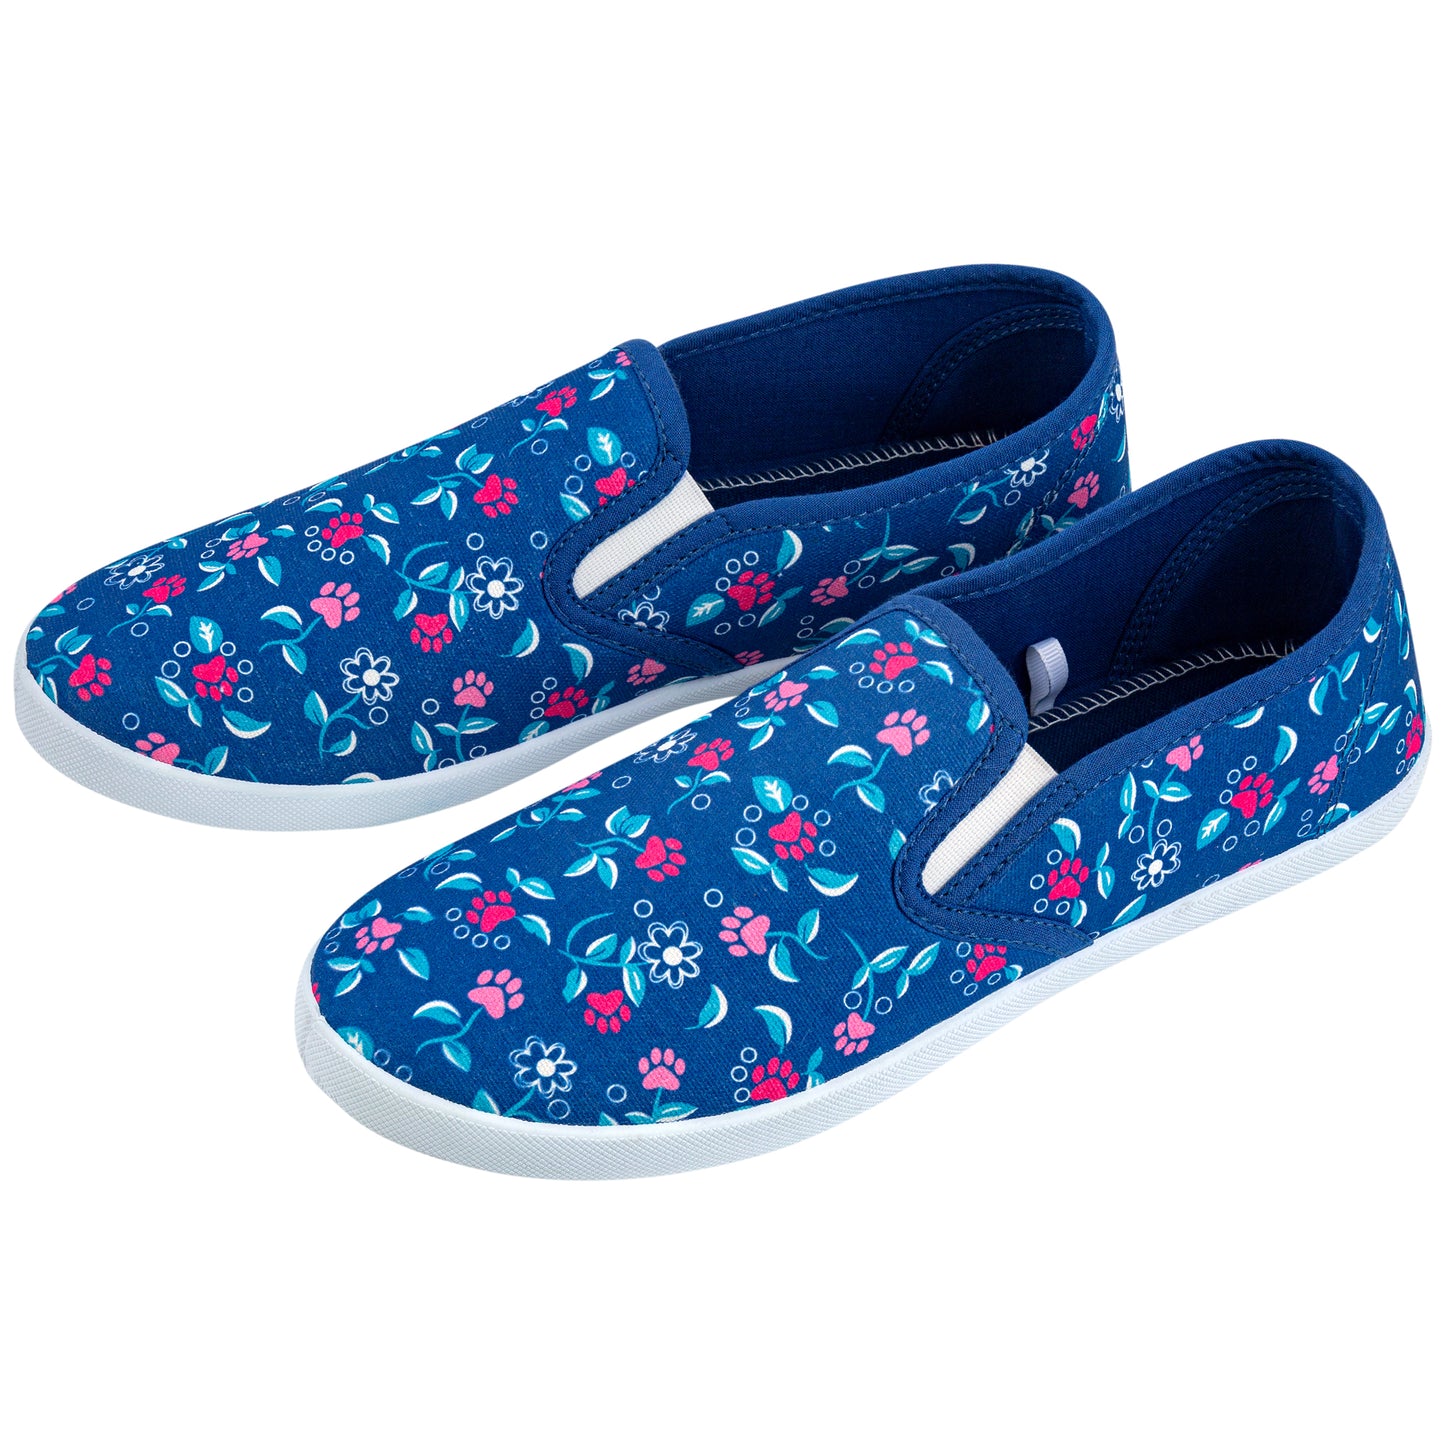 Paw Print Canvas Slip-On Shoes